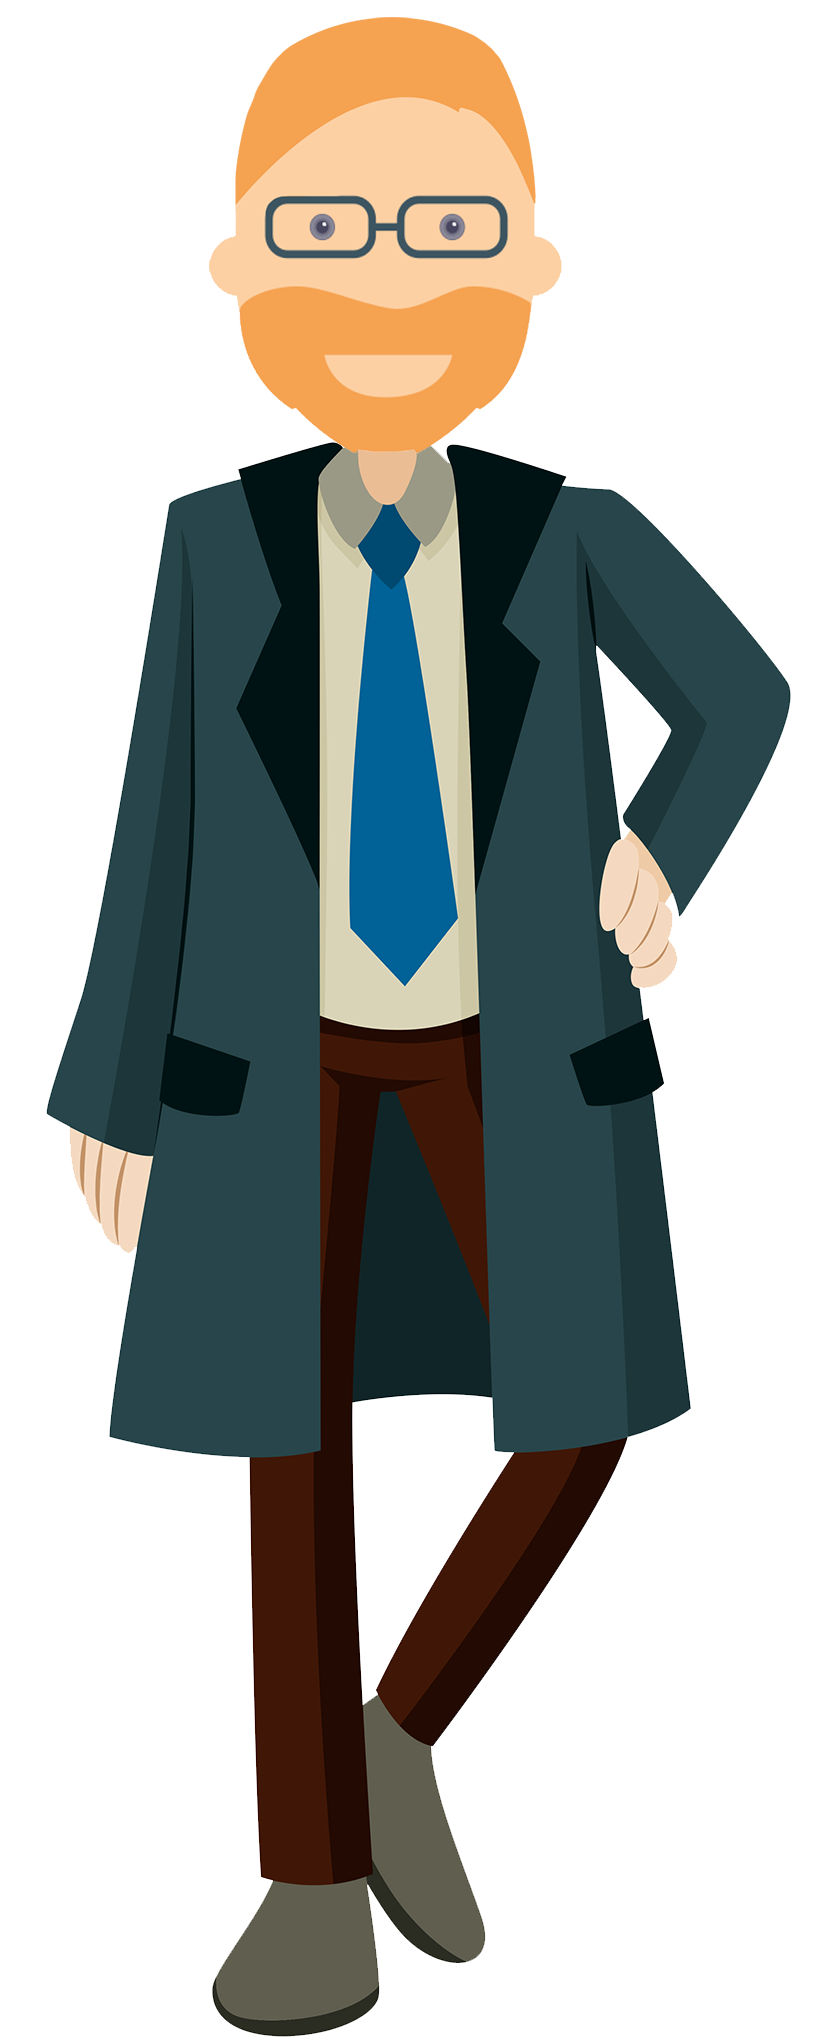 graphic of pawel standing in business clothing